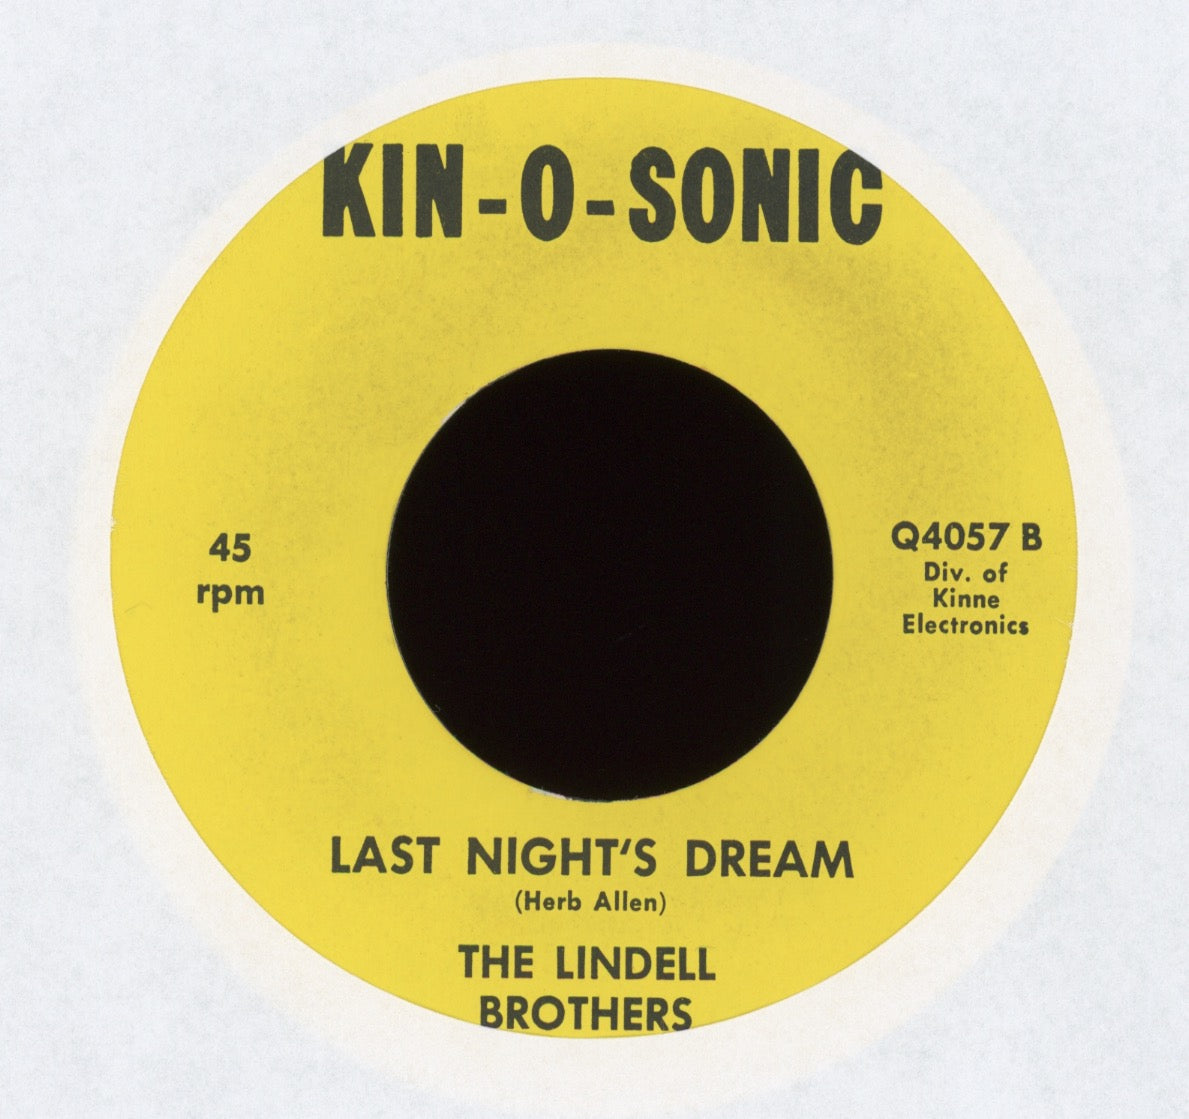 The Lindell Brothers - Last Night's Dream on Kin-O-Sonic